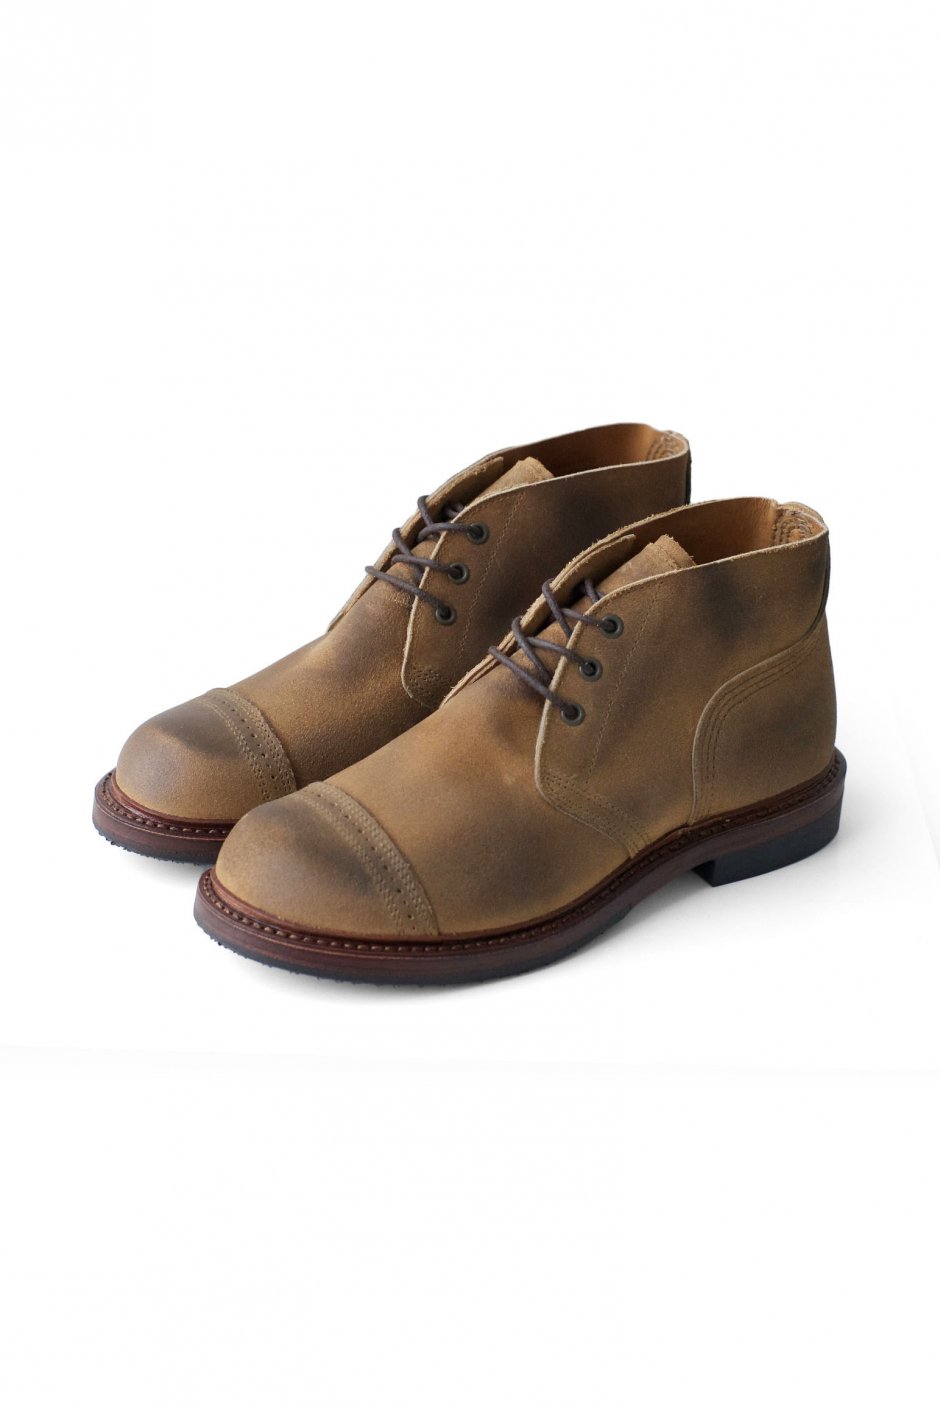 RED WING Nigel Cabourn ナイジェル ケーボン 通販 正規店 フェートン ...